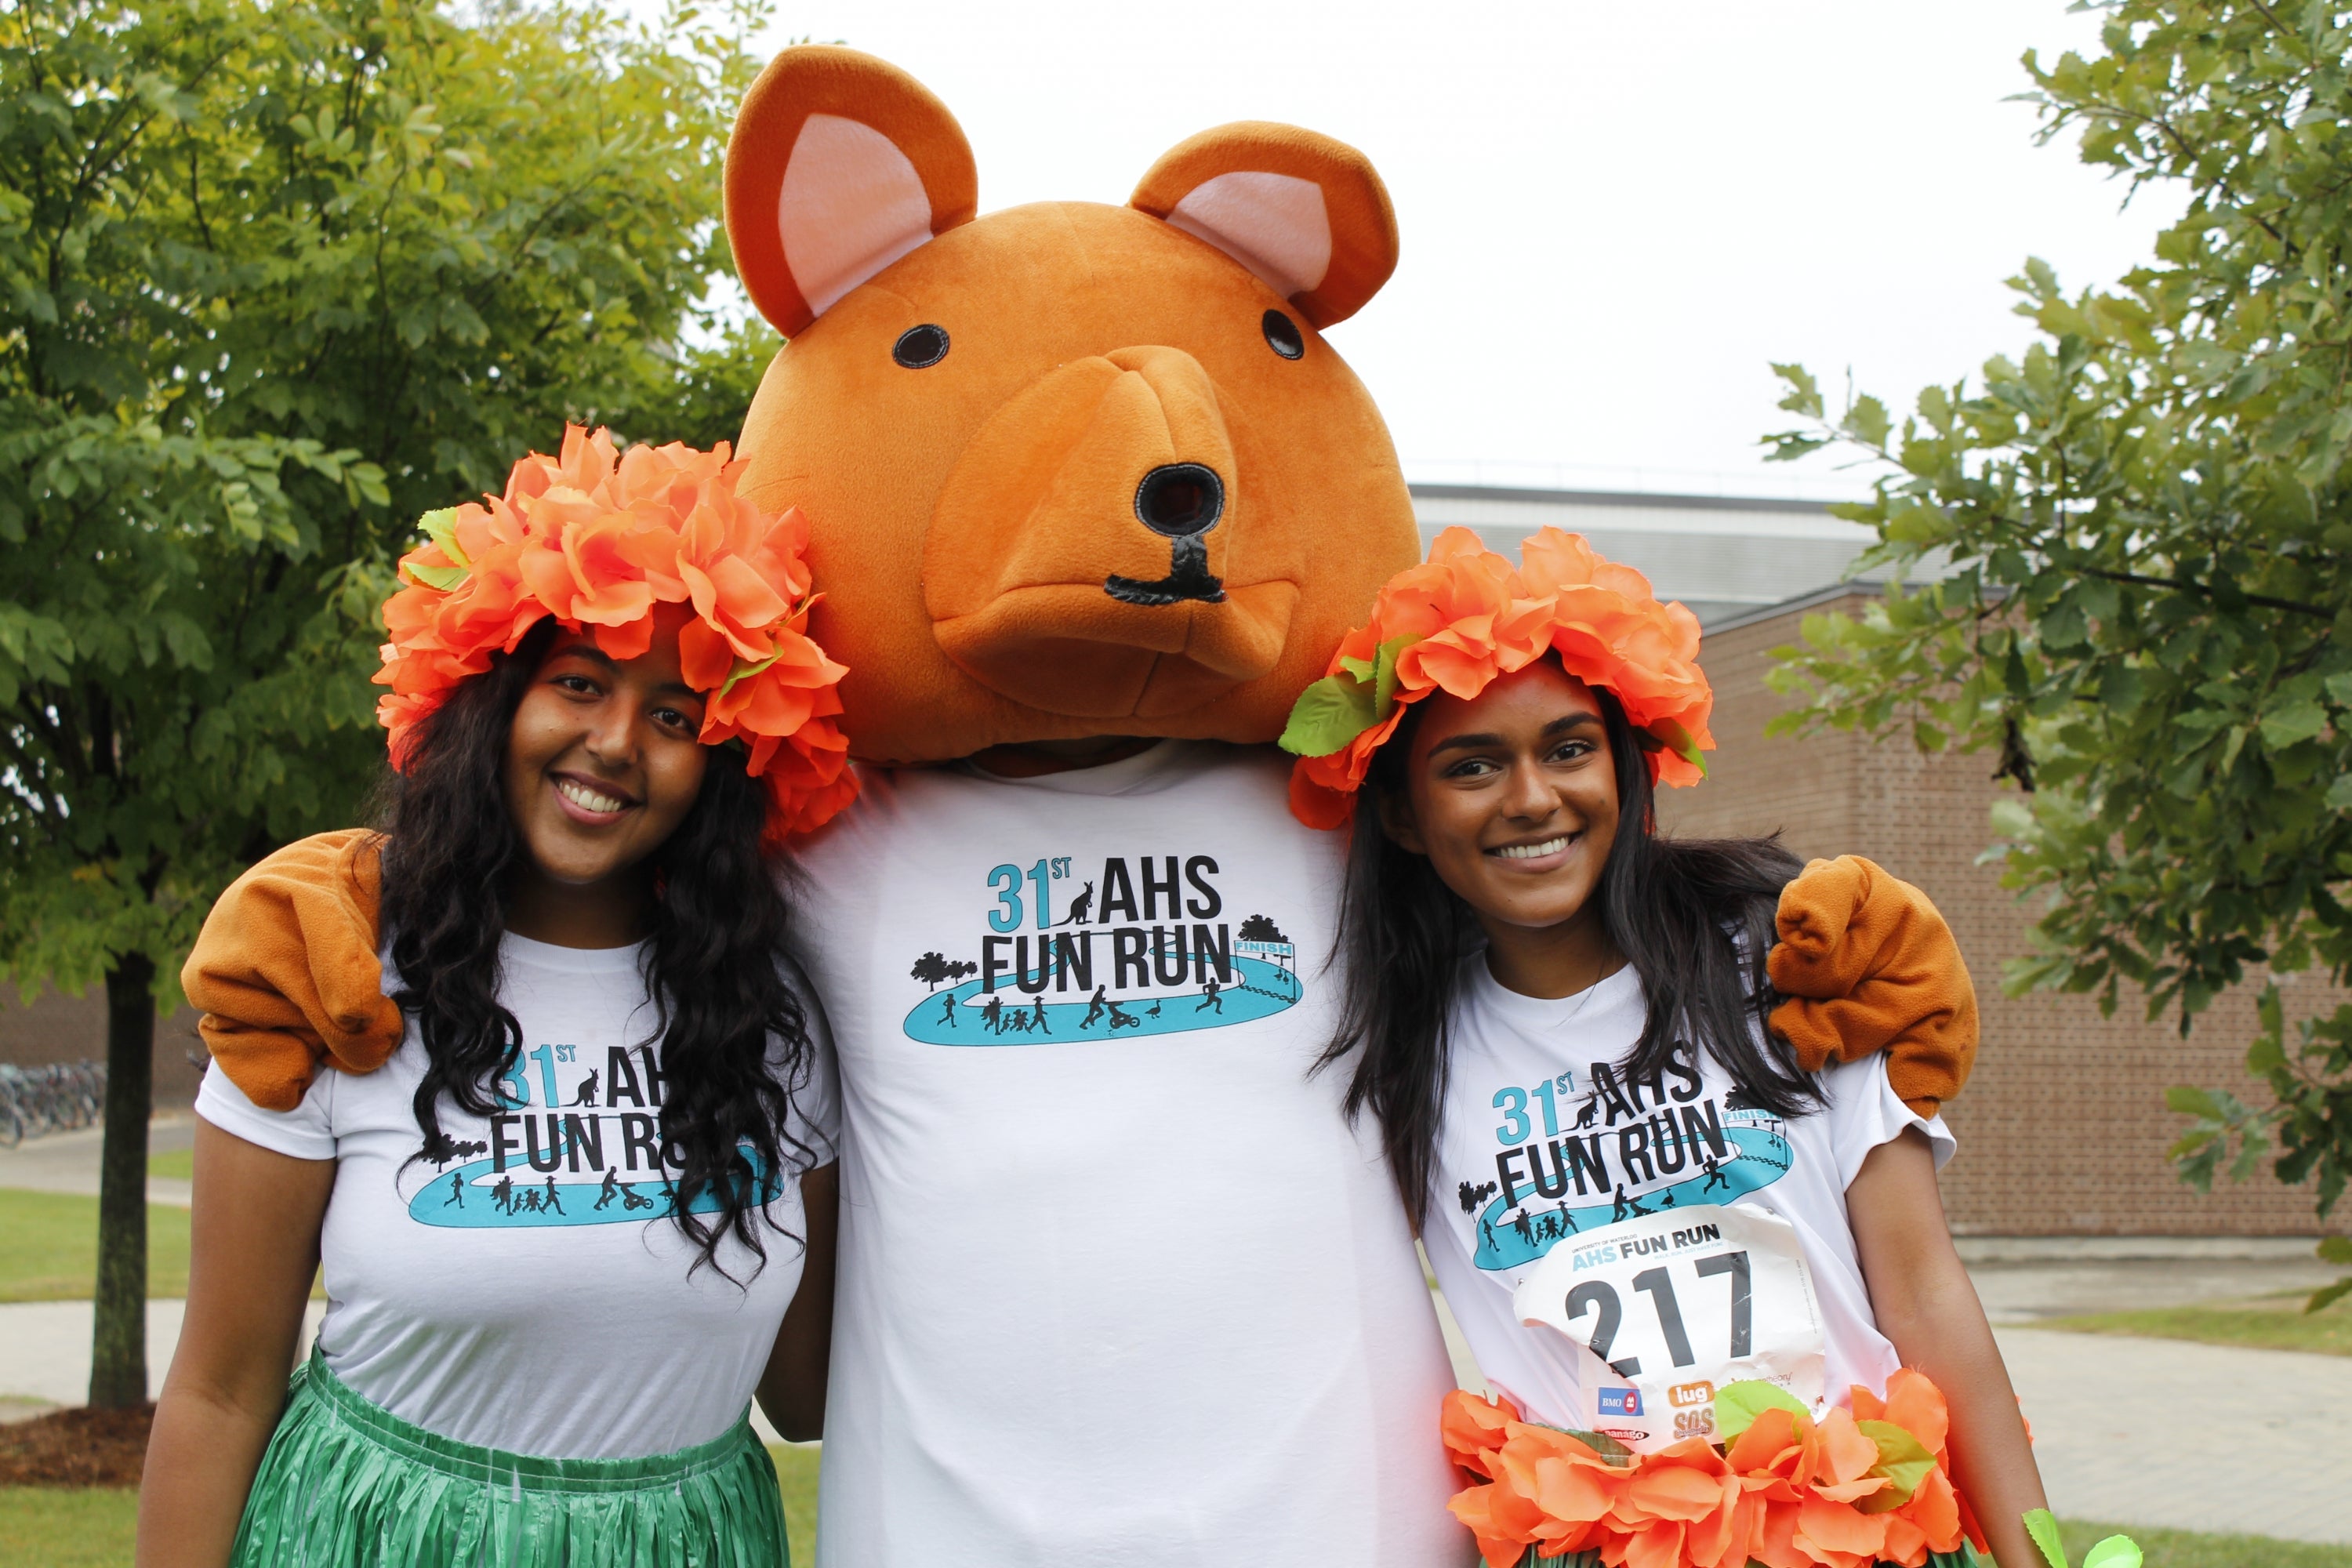 Two runners with AHSSIE the mascot